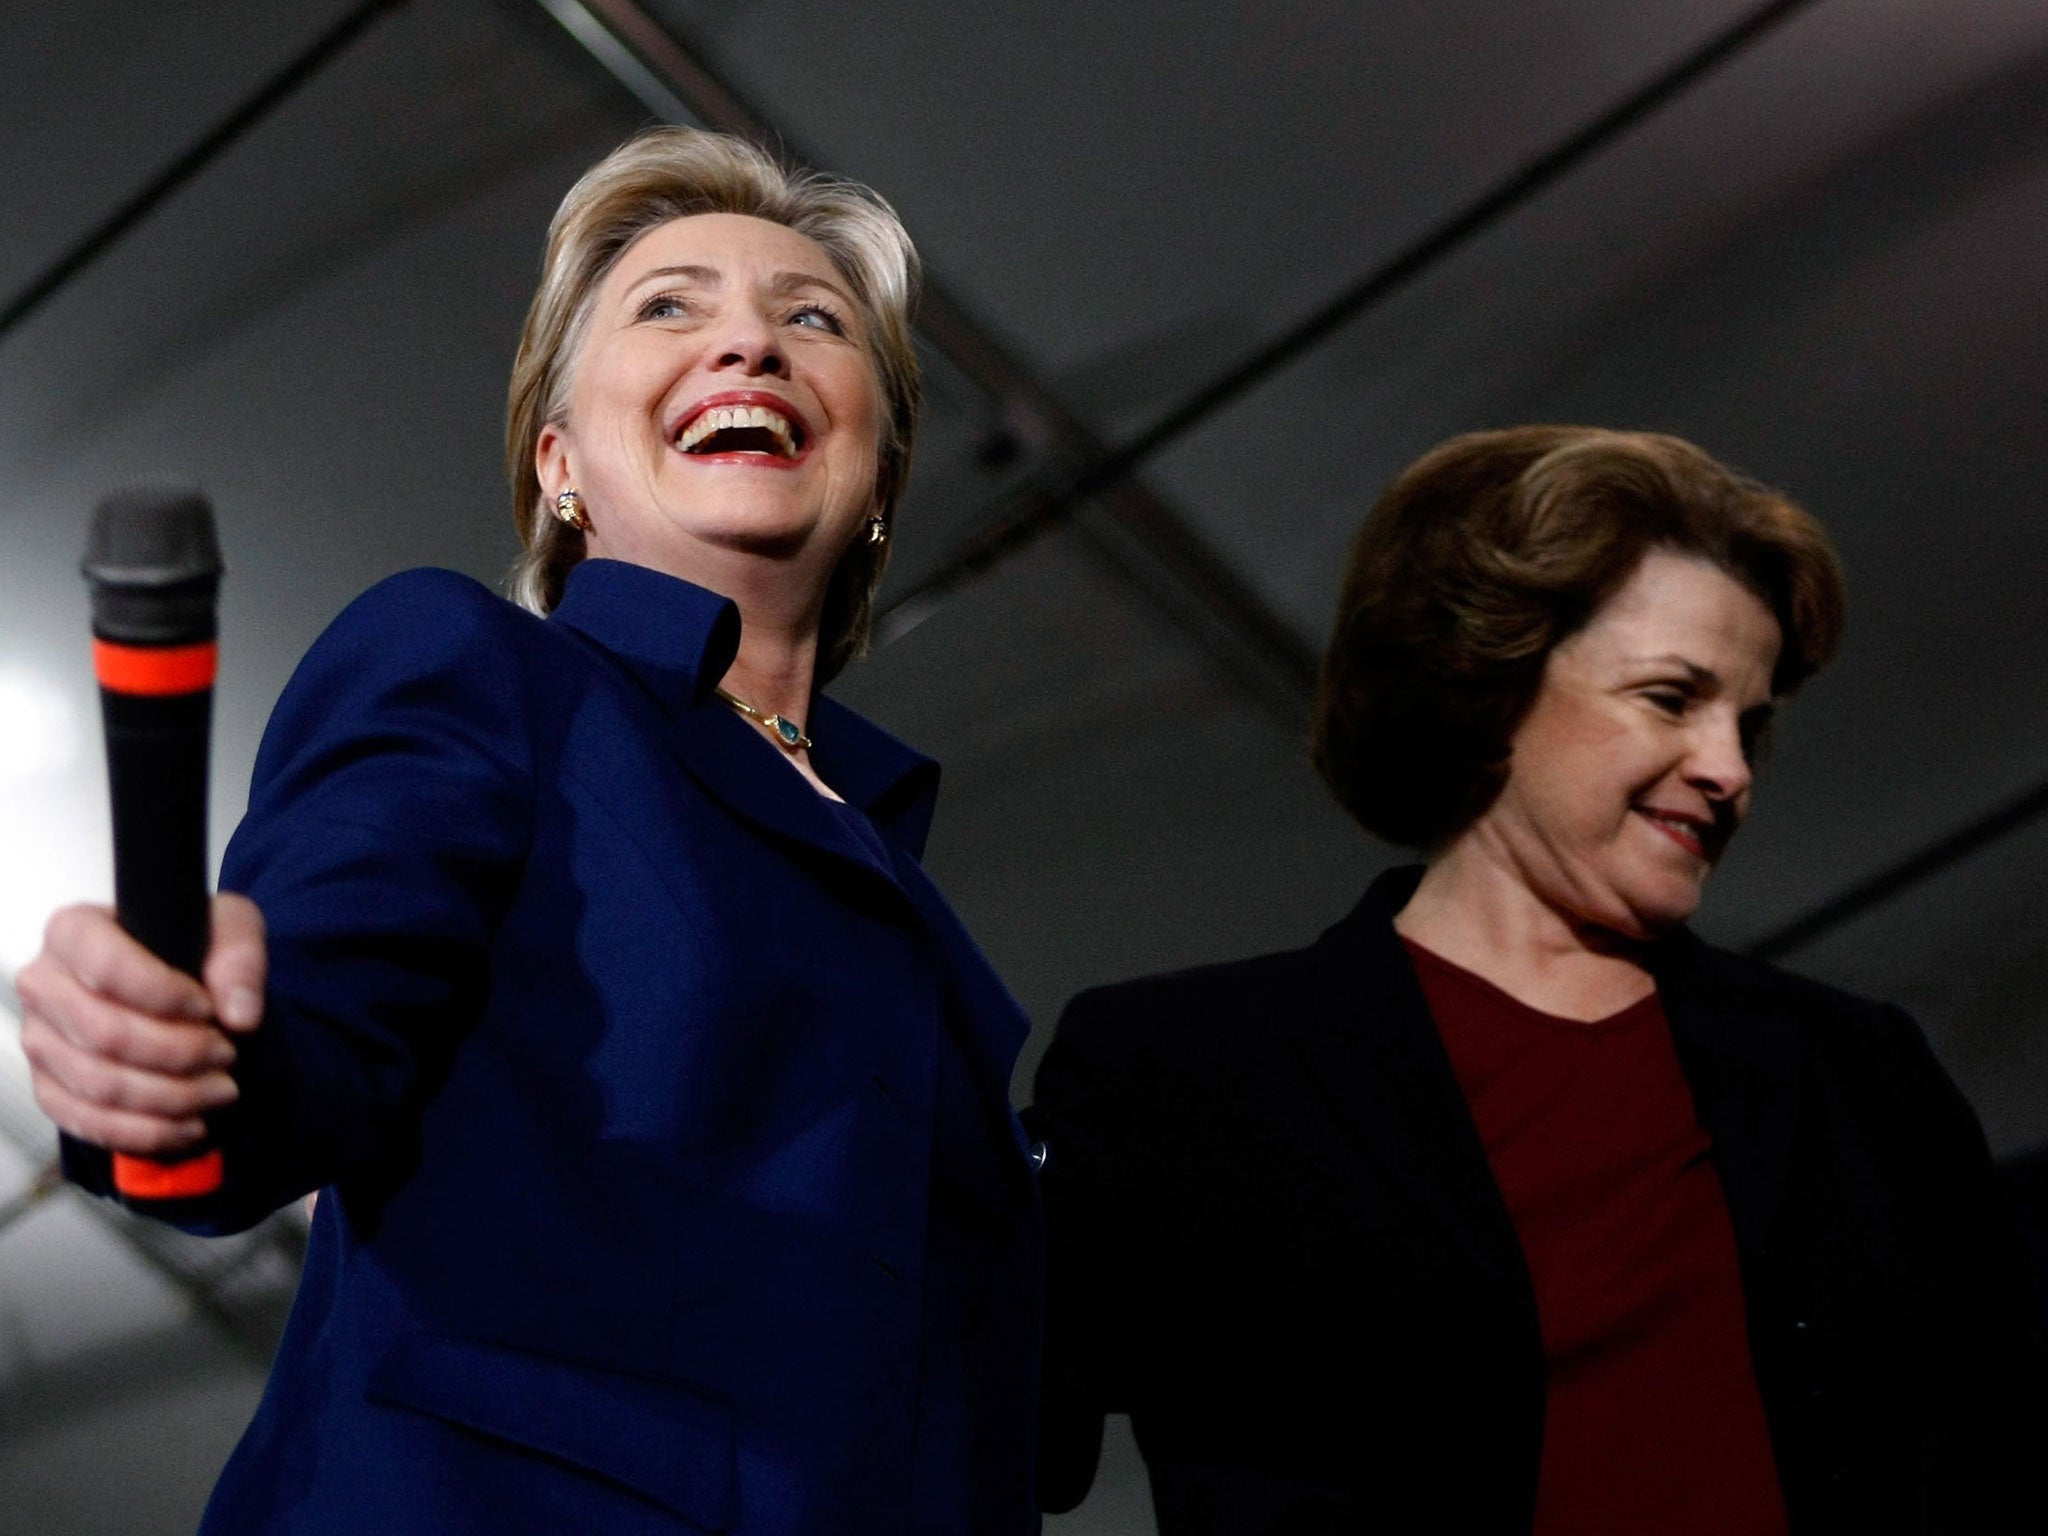 On the rise: Hillary Clinton, left, and Dianne Feinstein, head of the Senate Intelligence Committee